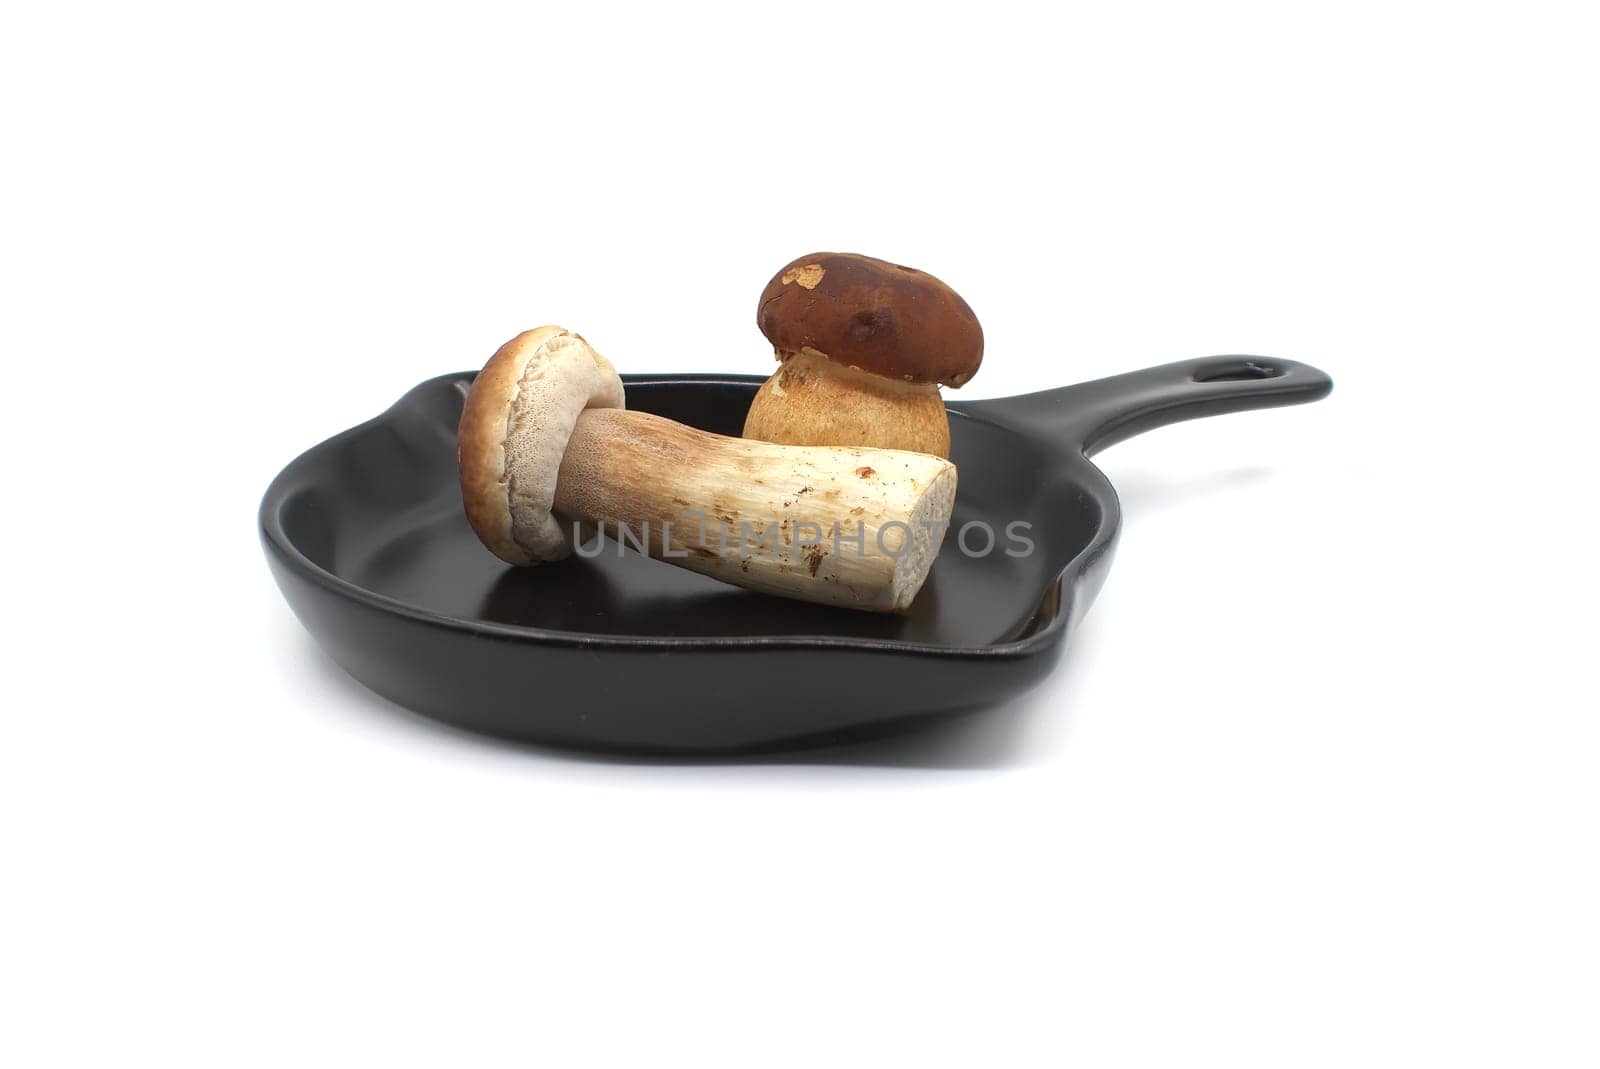 Culinary scene with mushrooms in fry pan by NetPix